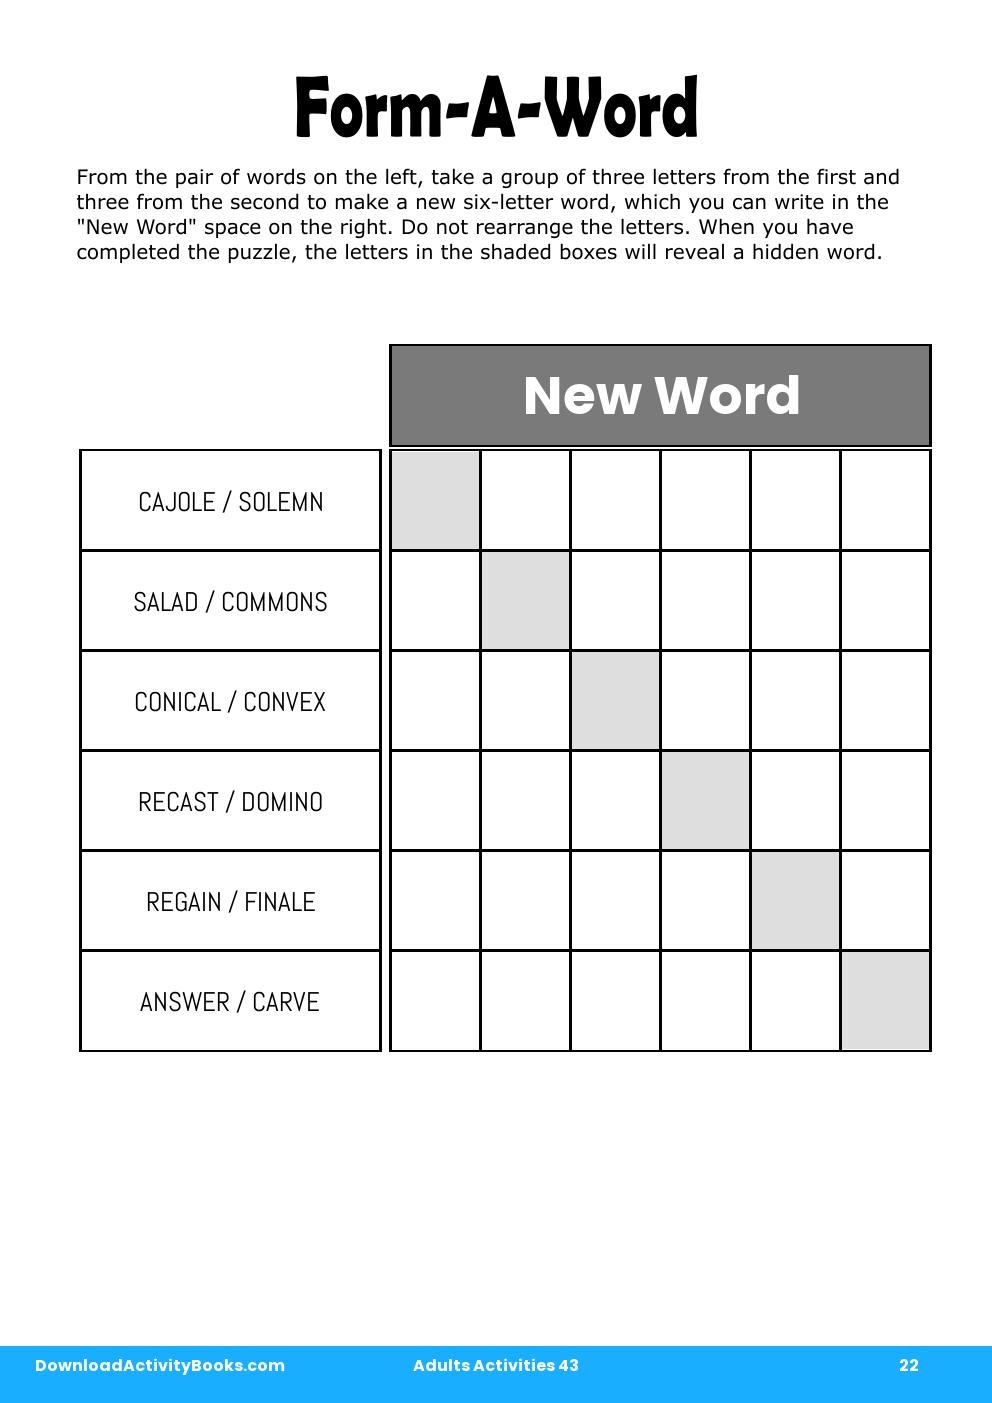 Form-A-Word in Adults Activities 43